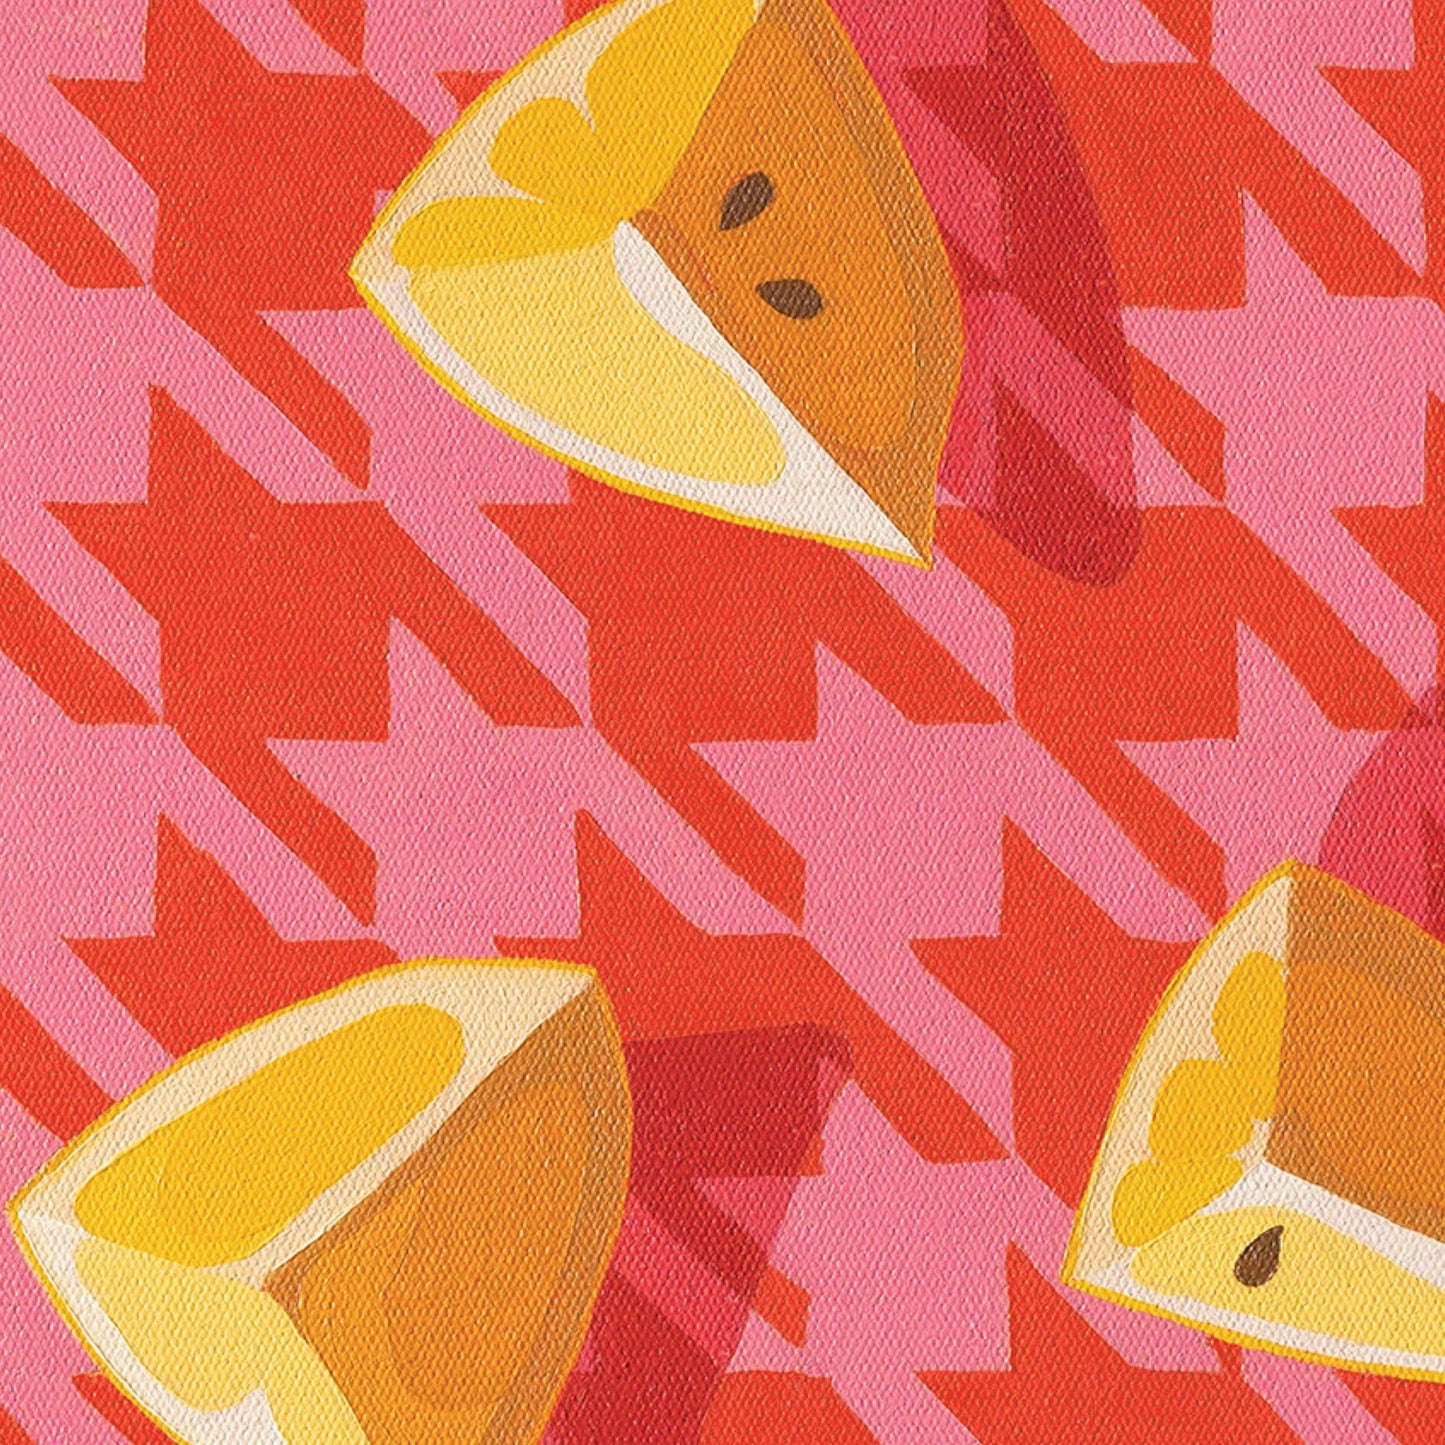 closeup of a fine art paper print of an original oil painting of three wedges of lemon on a pink and red houndstooth background